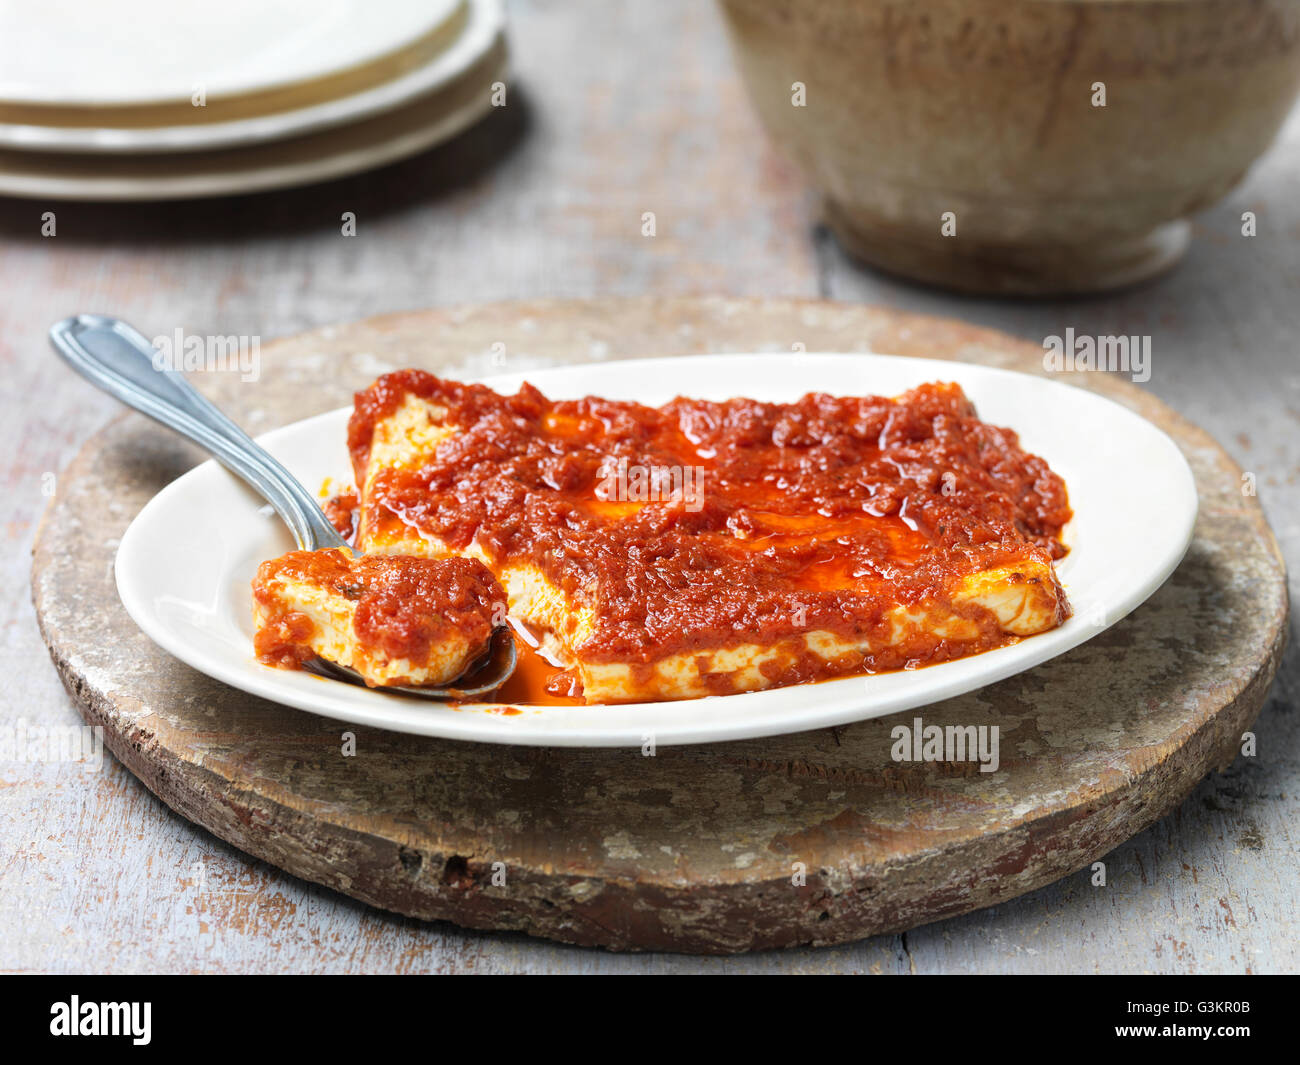 Baked feta cheese with sun dried tomato sauce, in bowl with spoon Stock Photo